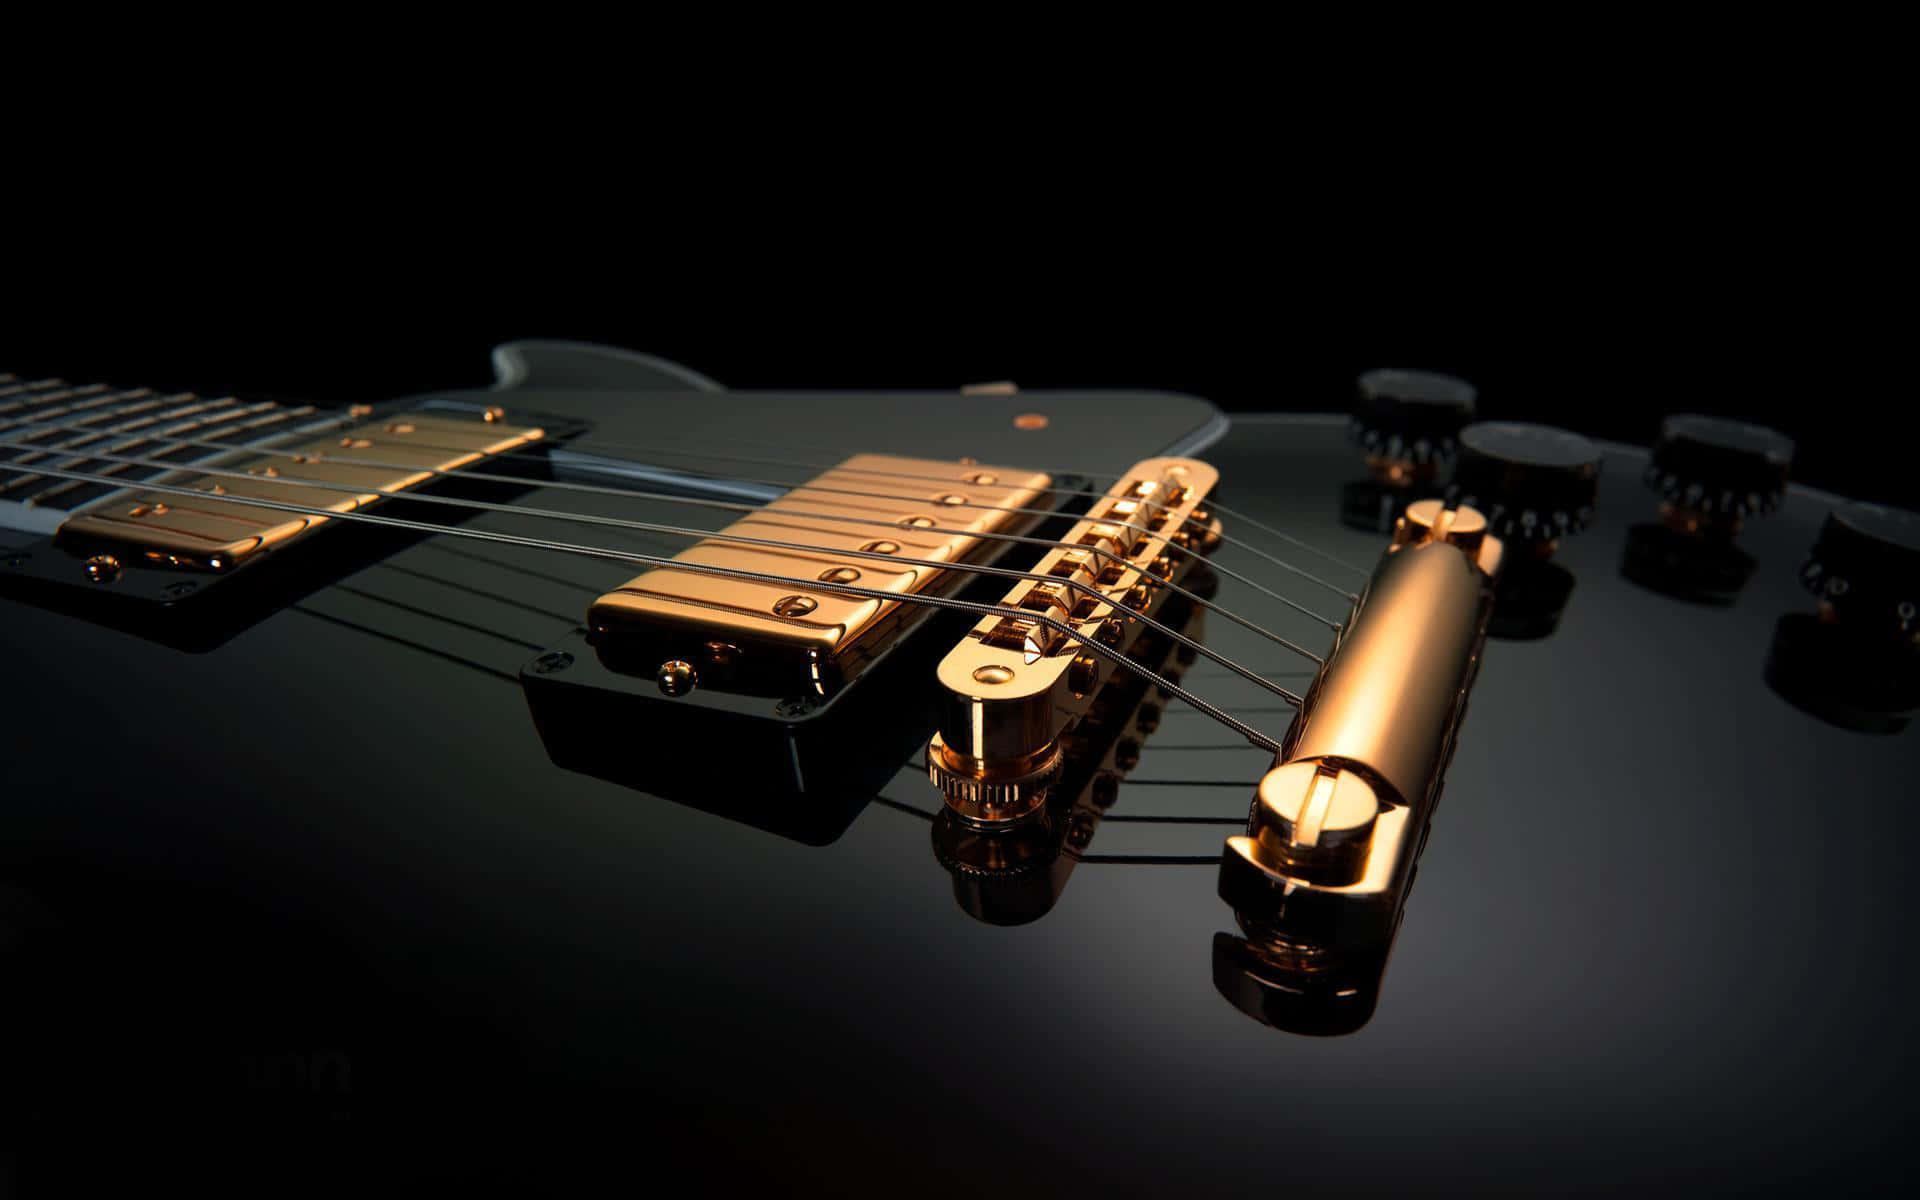 A Black Guitar With Gold Hardware On It